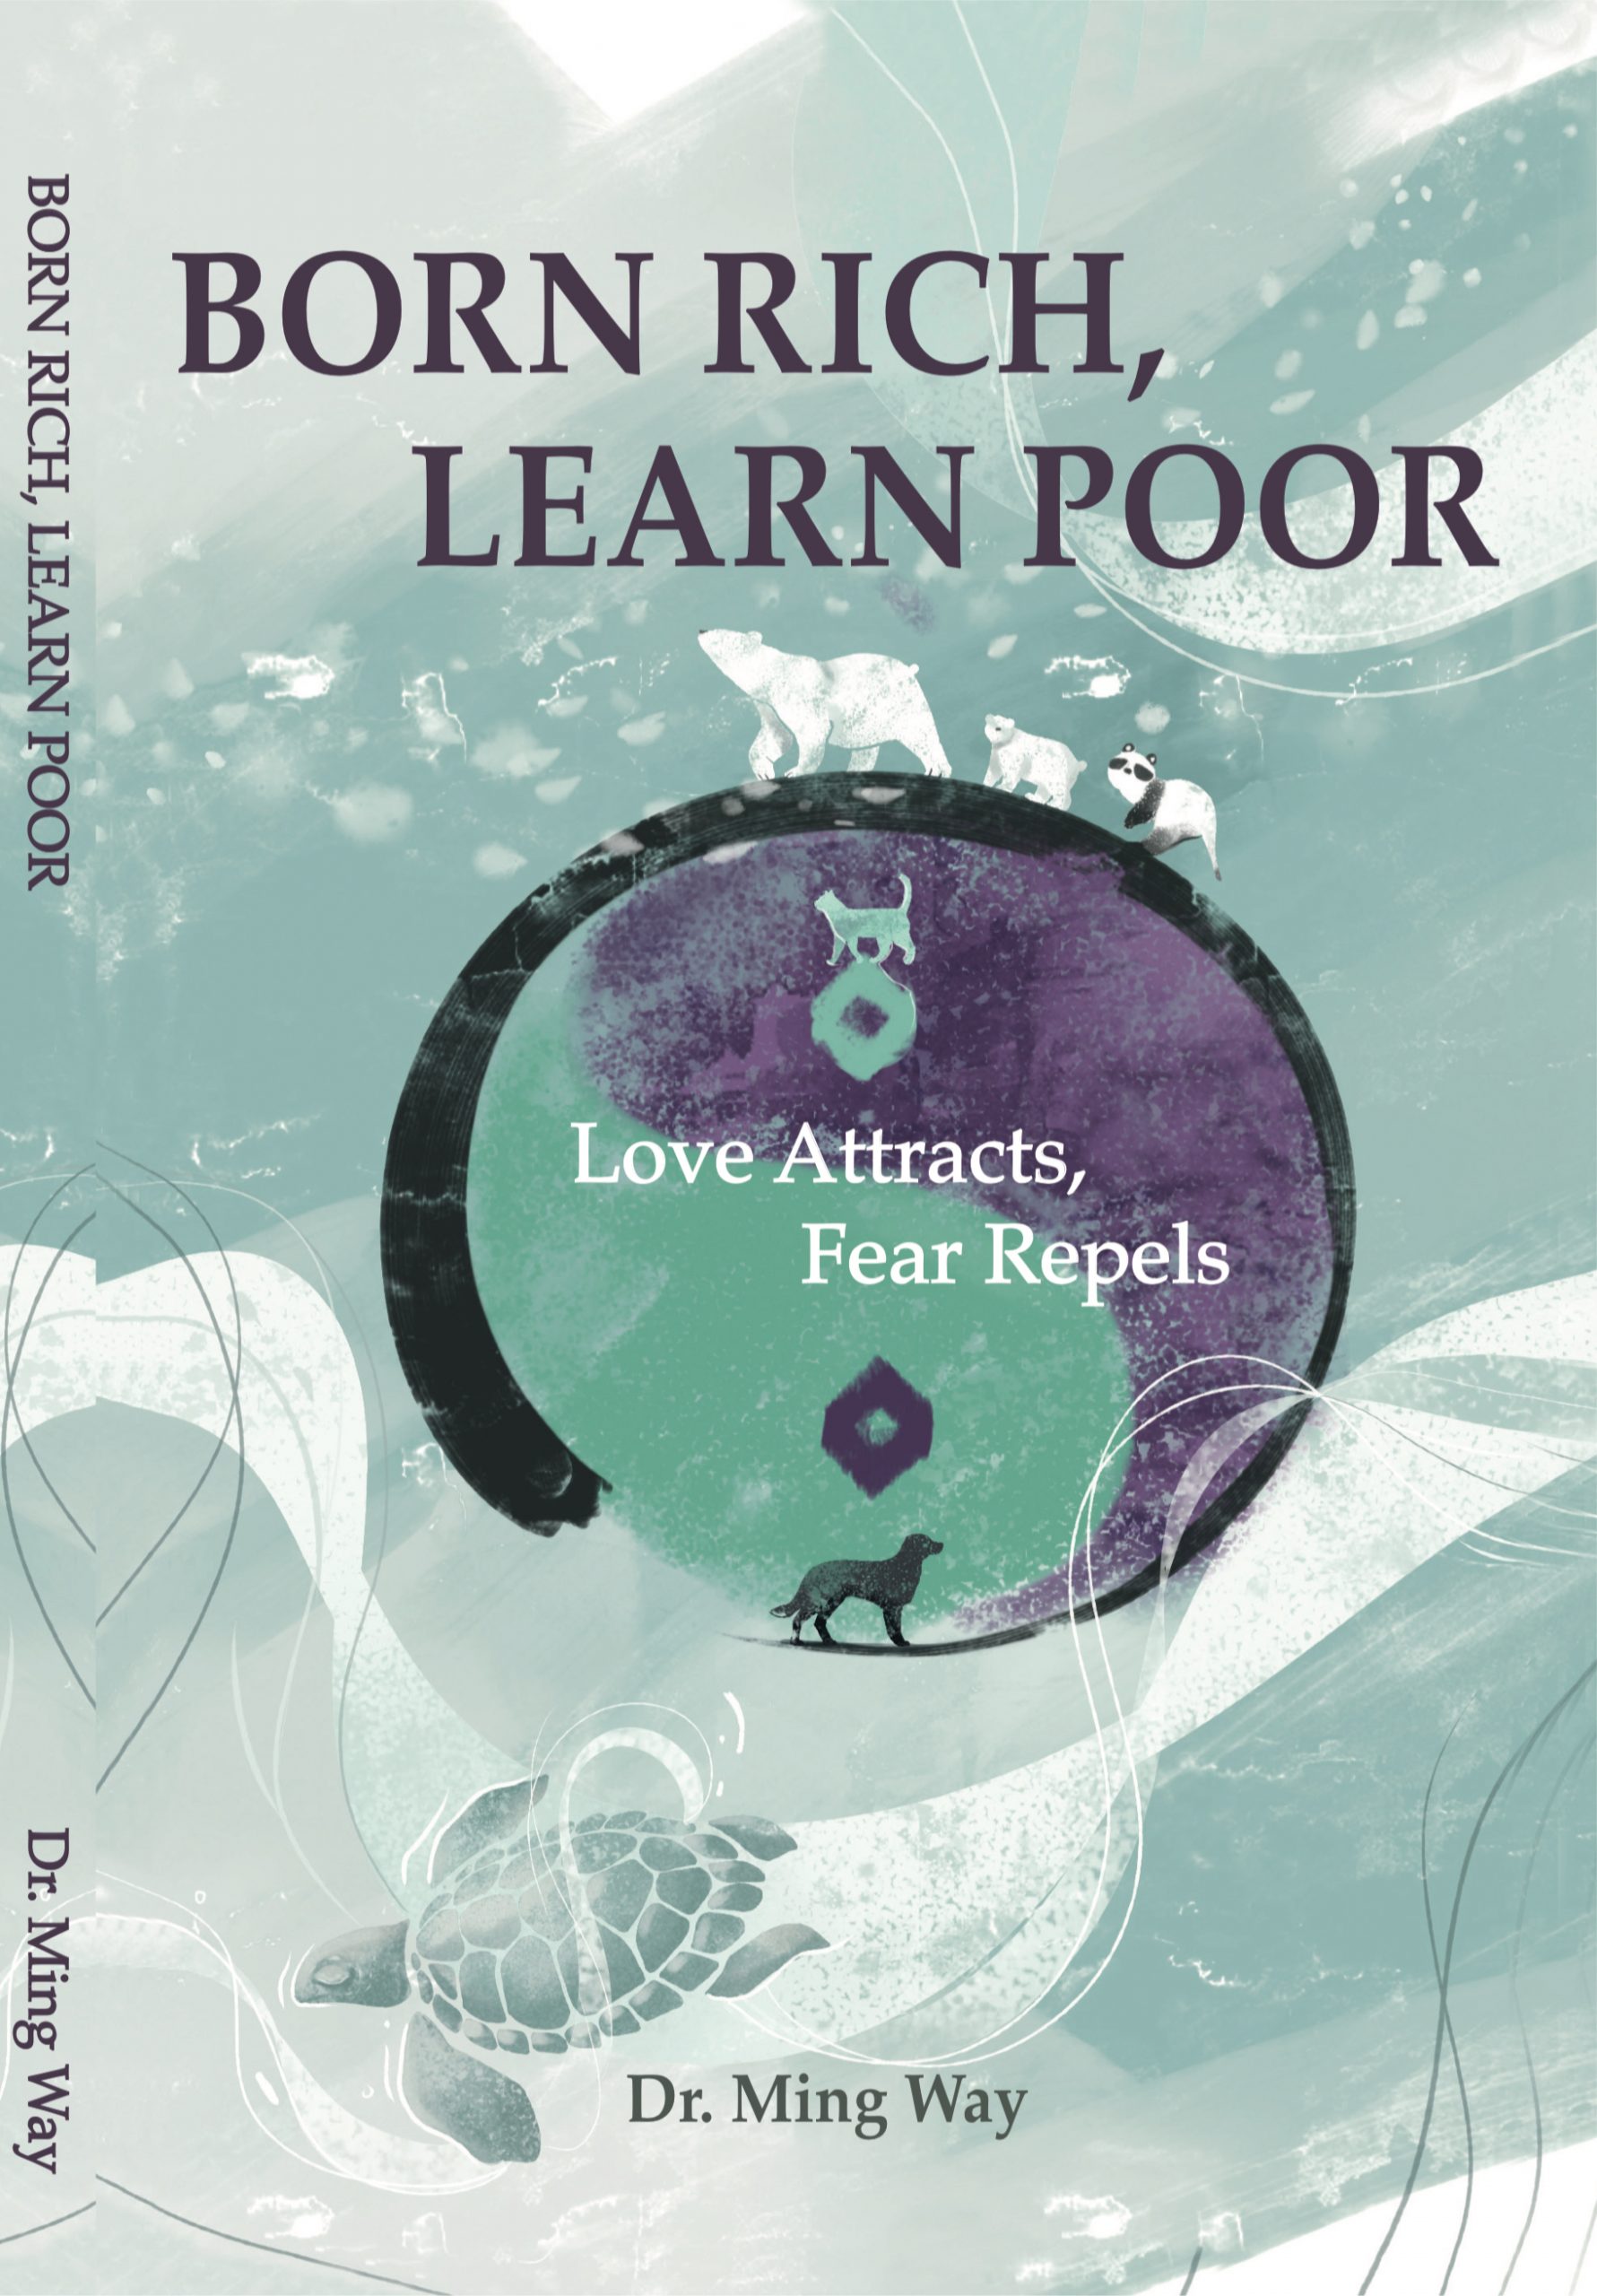 Born Rich Learn Poor - Love Attracts, Fear Repels by Dr. Ming Way